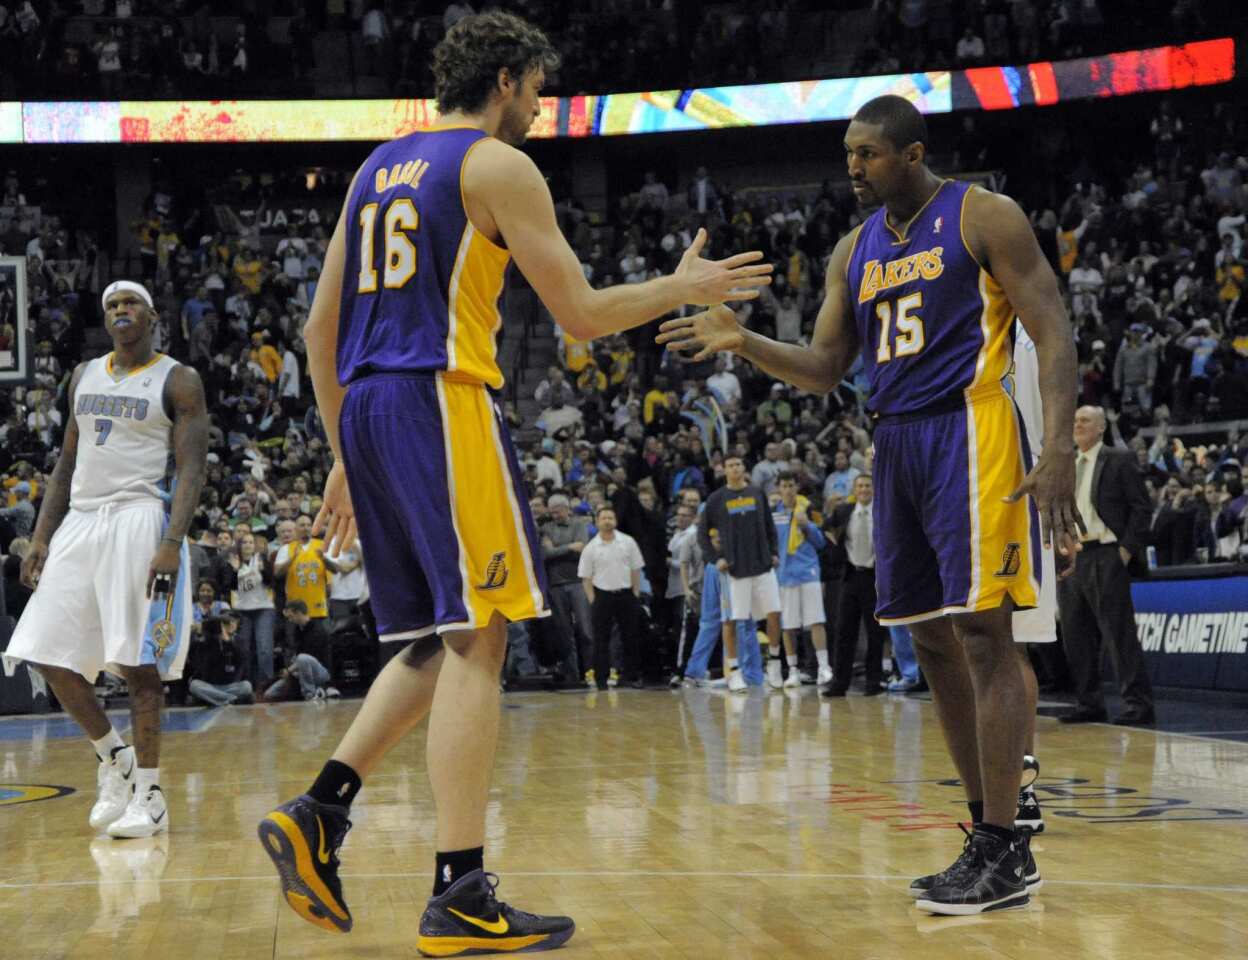 Lakers forwards Pau Gasol and Metta World Peace celebrate a basket against the Nuggets in the fourth quarter Friday night at the Pepsi Center in Denver.